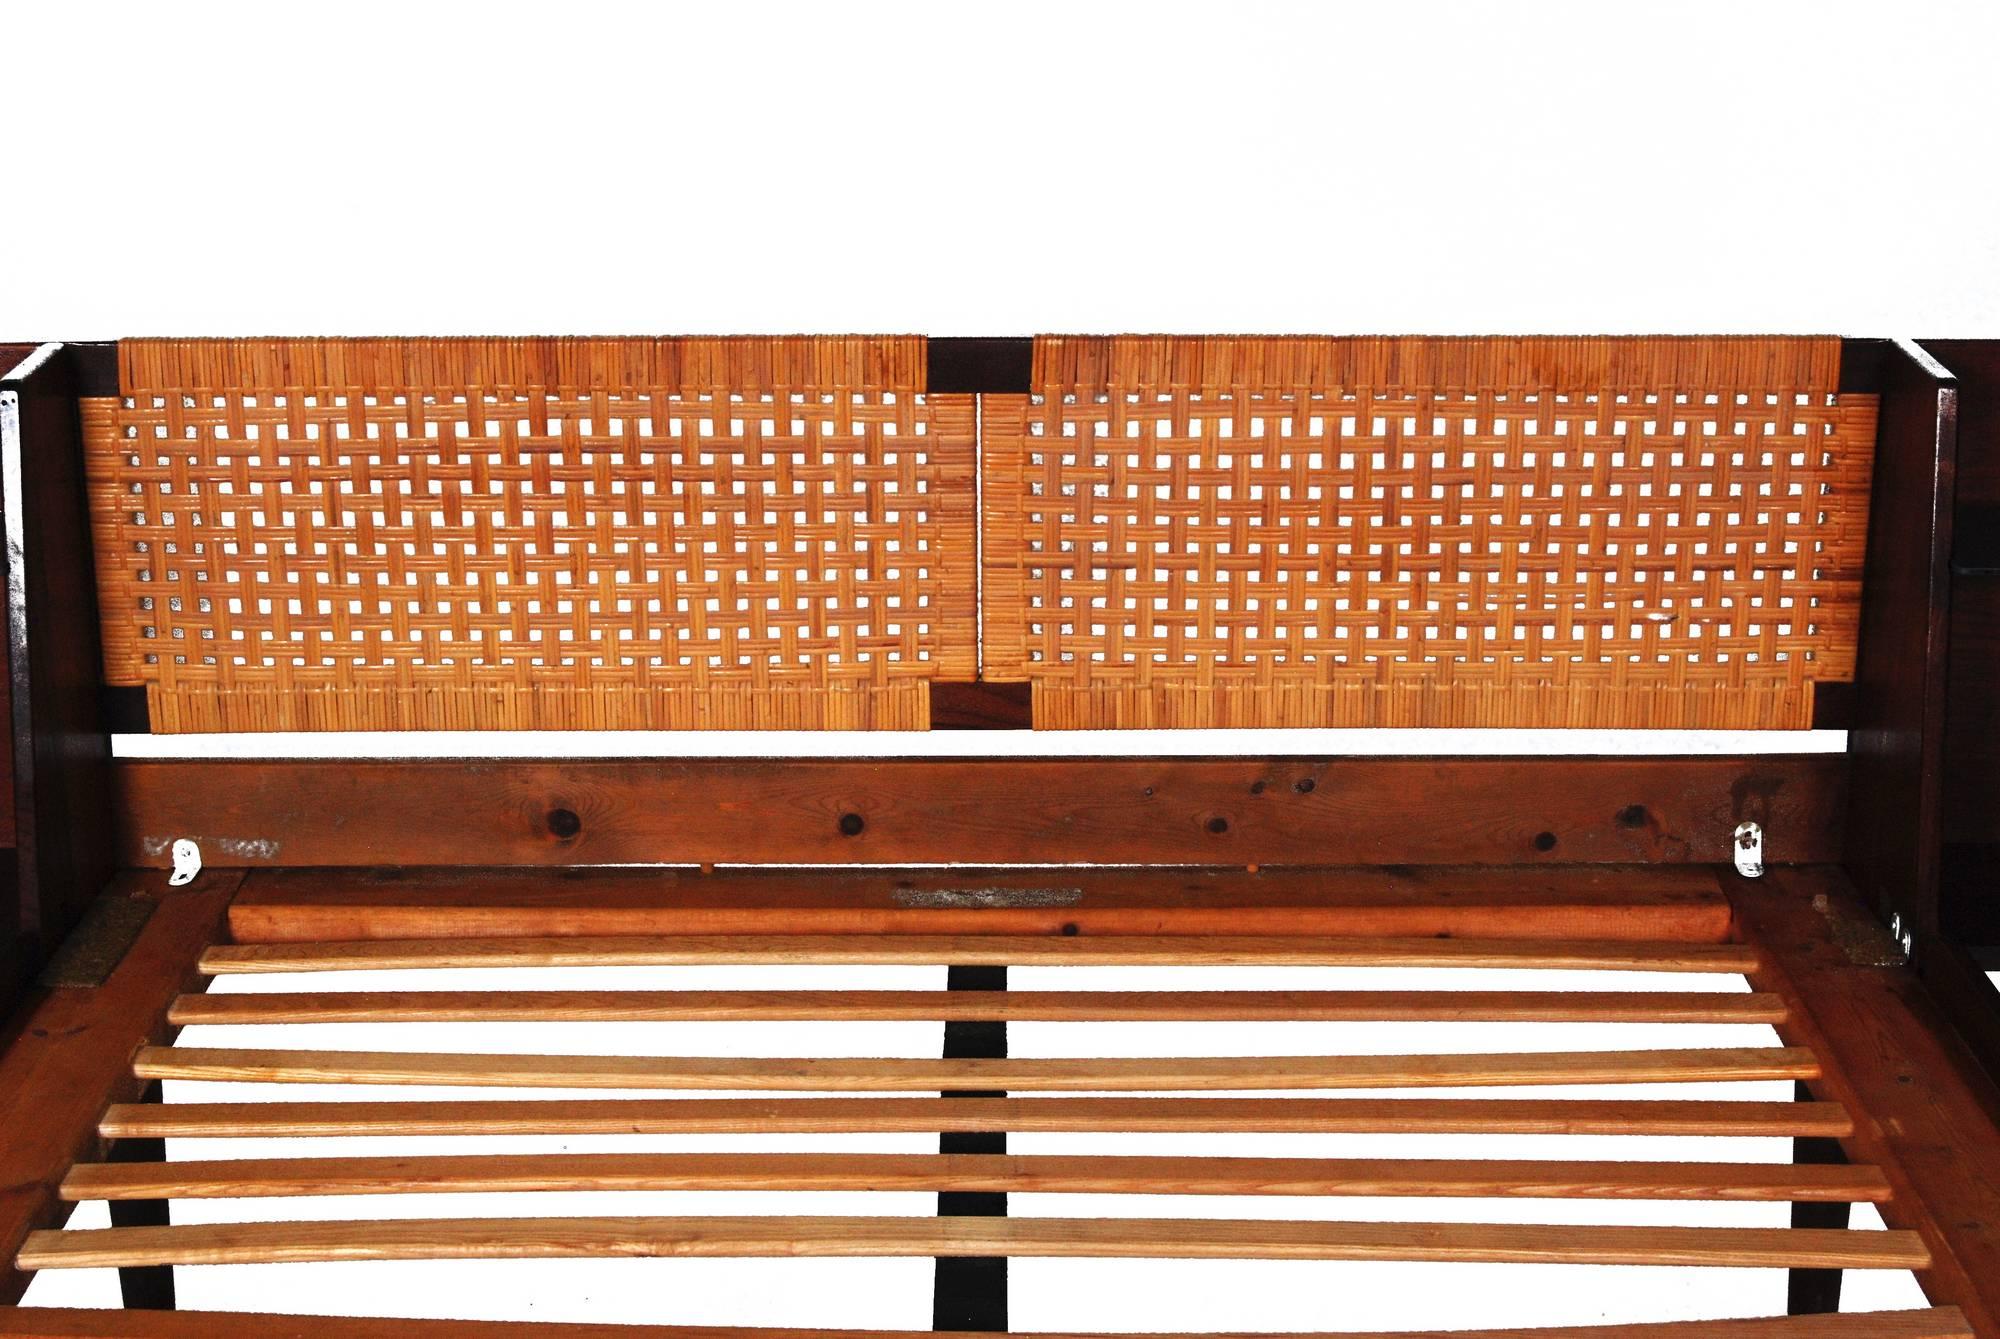 Rare 1960s Hans J. Wegner designed queen teak bed with caned headboard and black leather footboard for GETAMA, Denmark. The bed has built-in night tables with new smoked glass shelves. Caning, leather, and glass are perfect. One side rail has spot